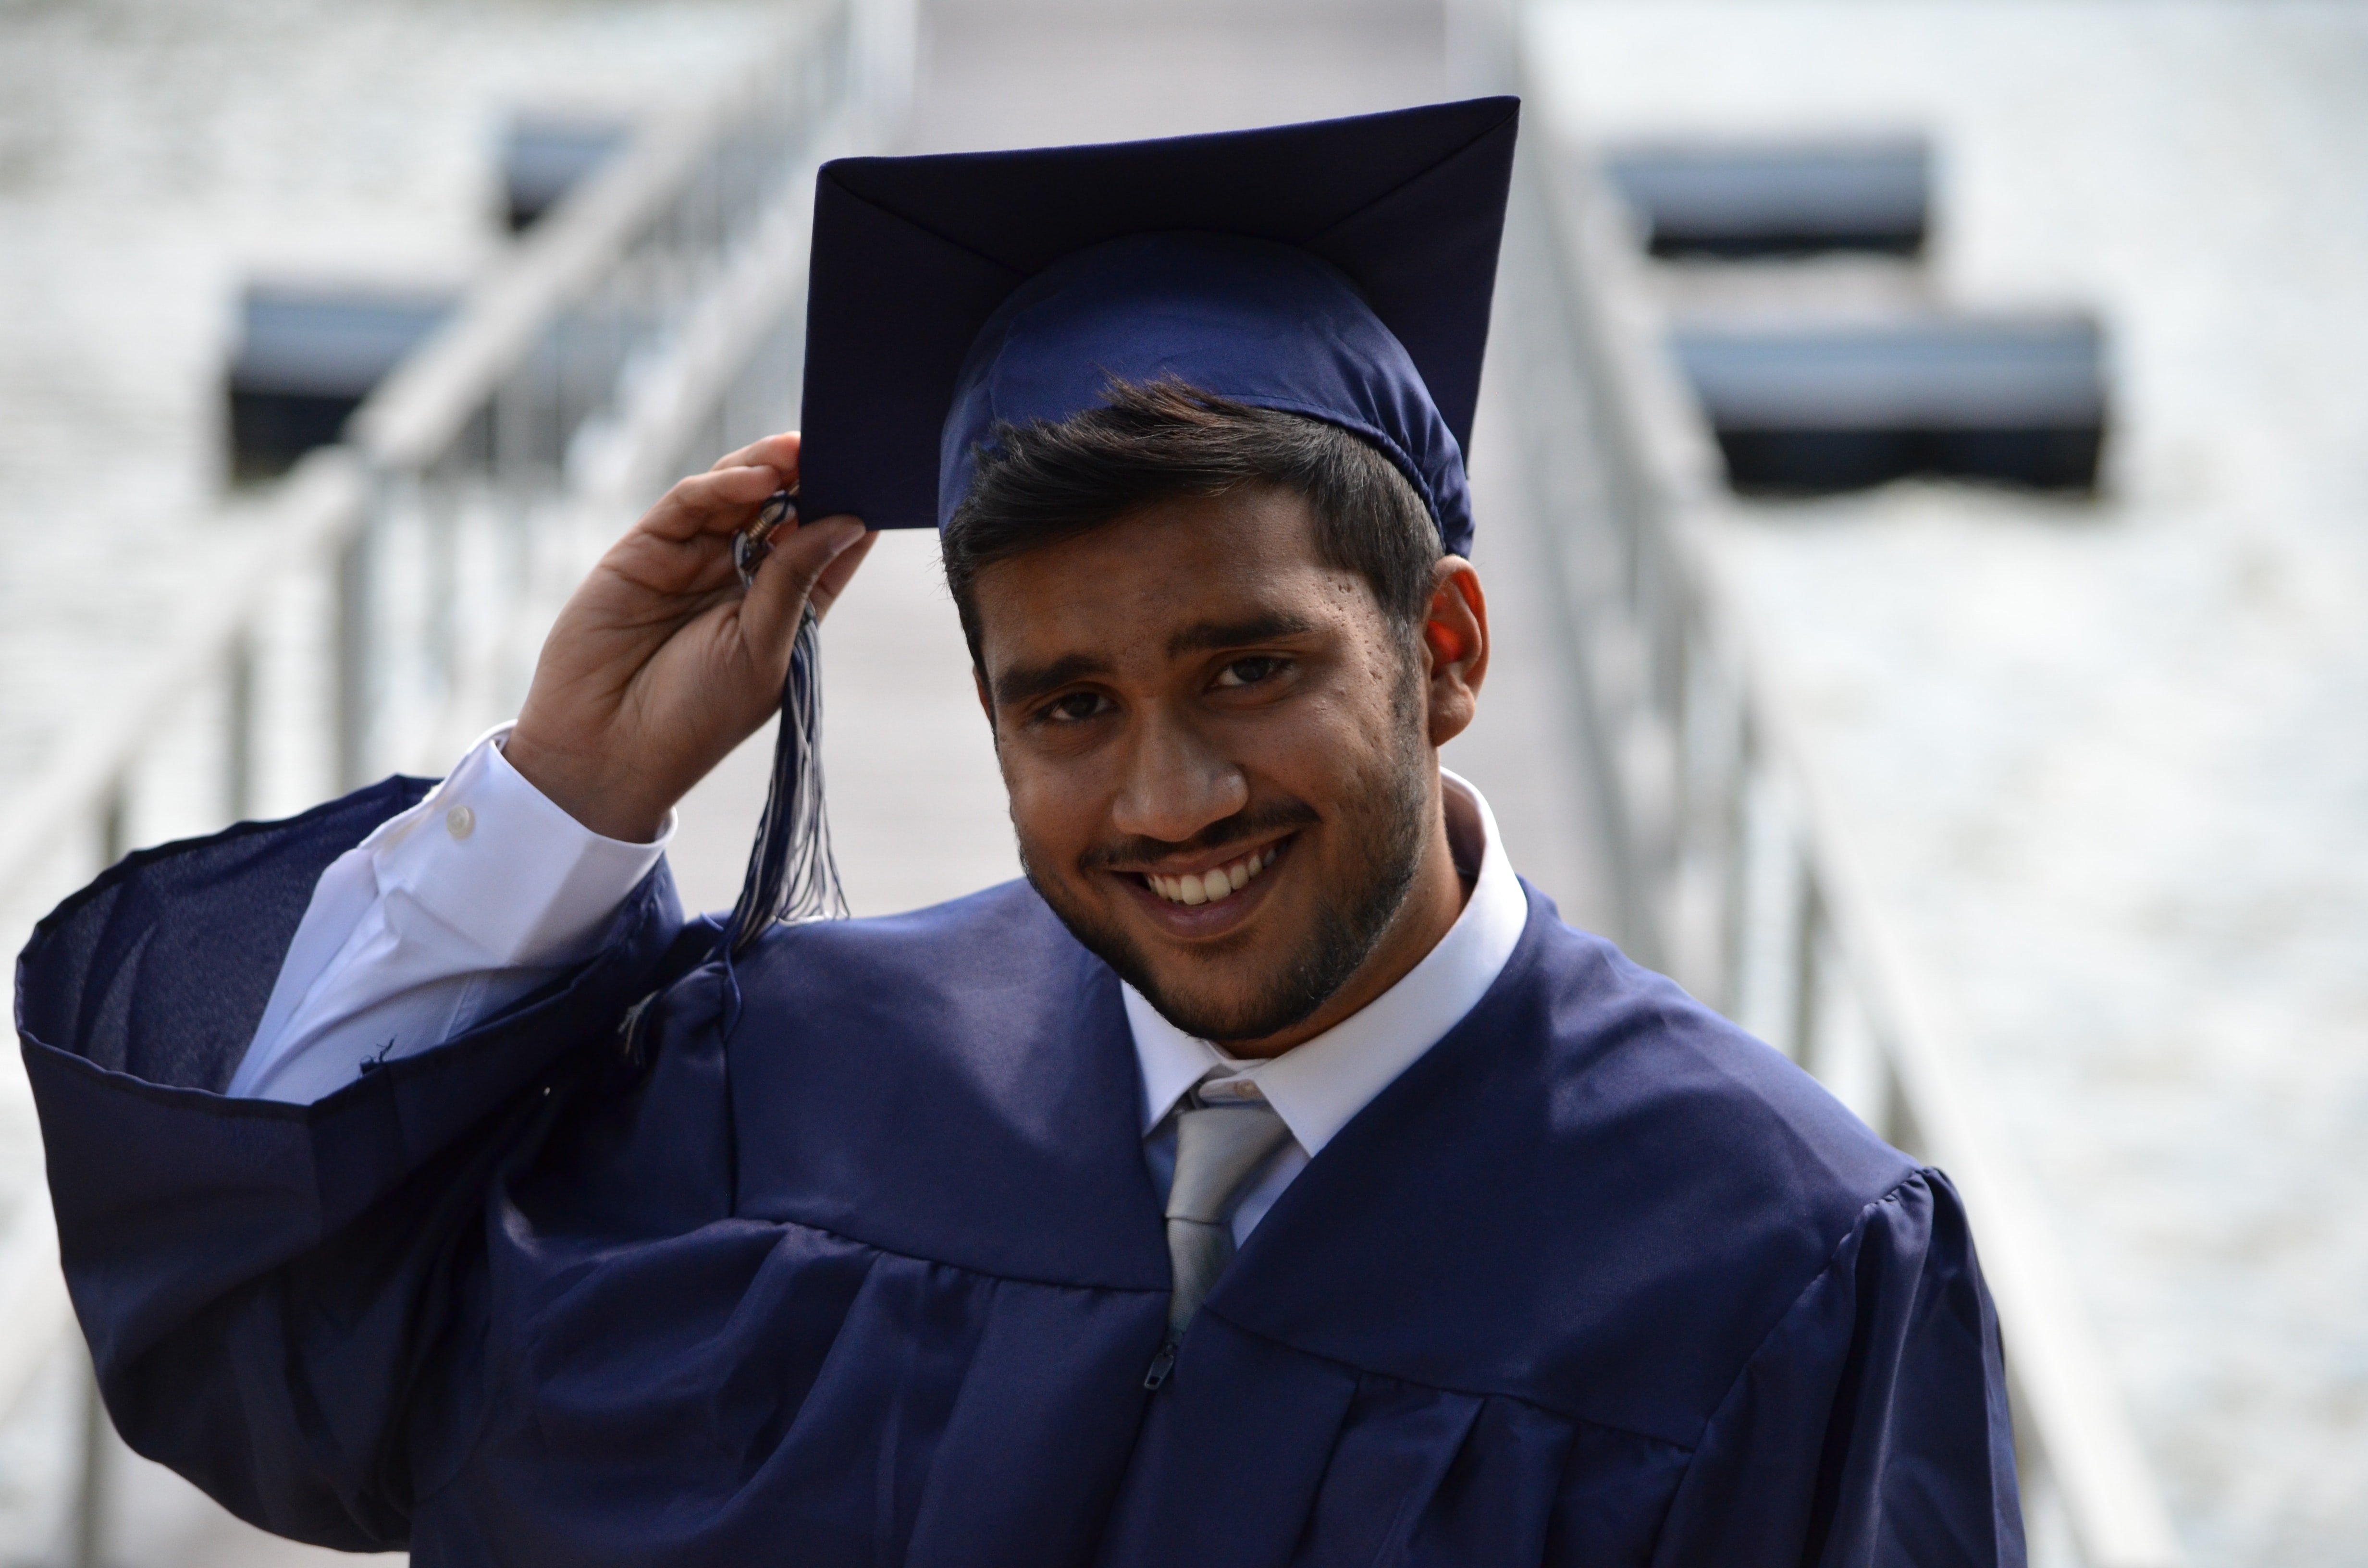 A multi ethnic man wearing a graduation cap and gown smiles and holds a hand up to his cap.